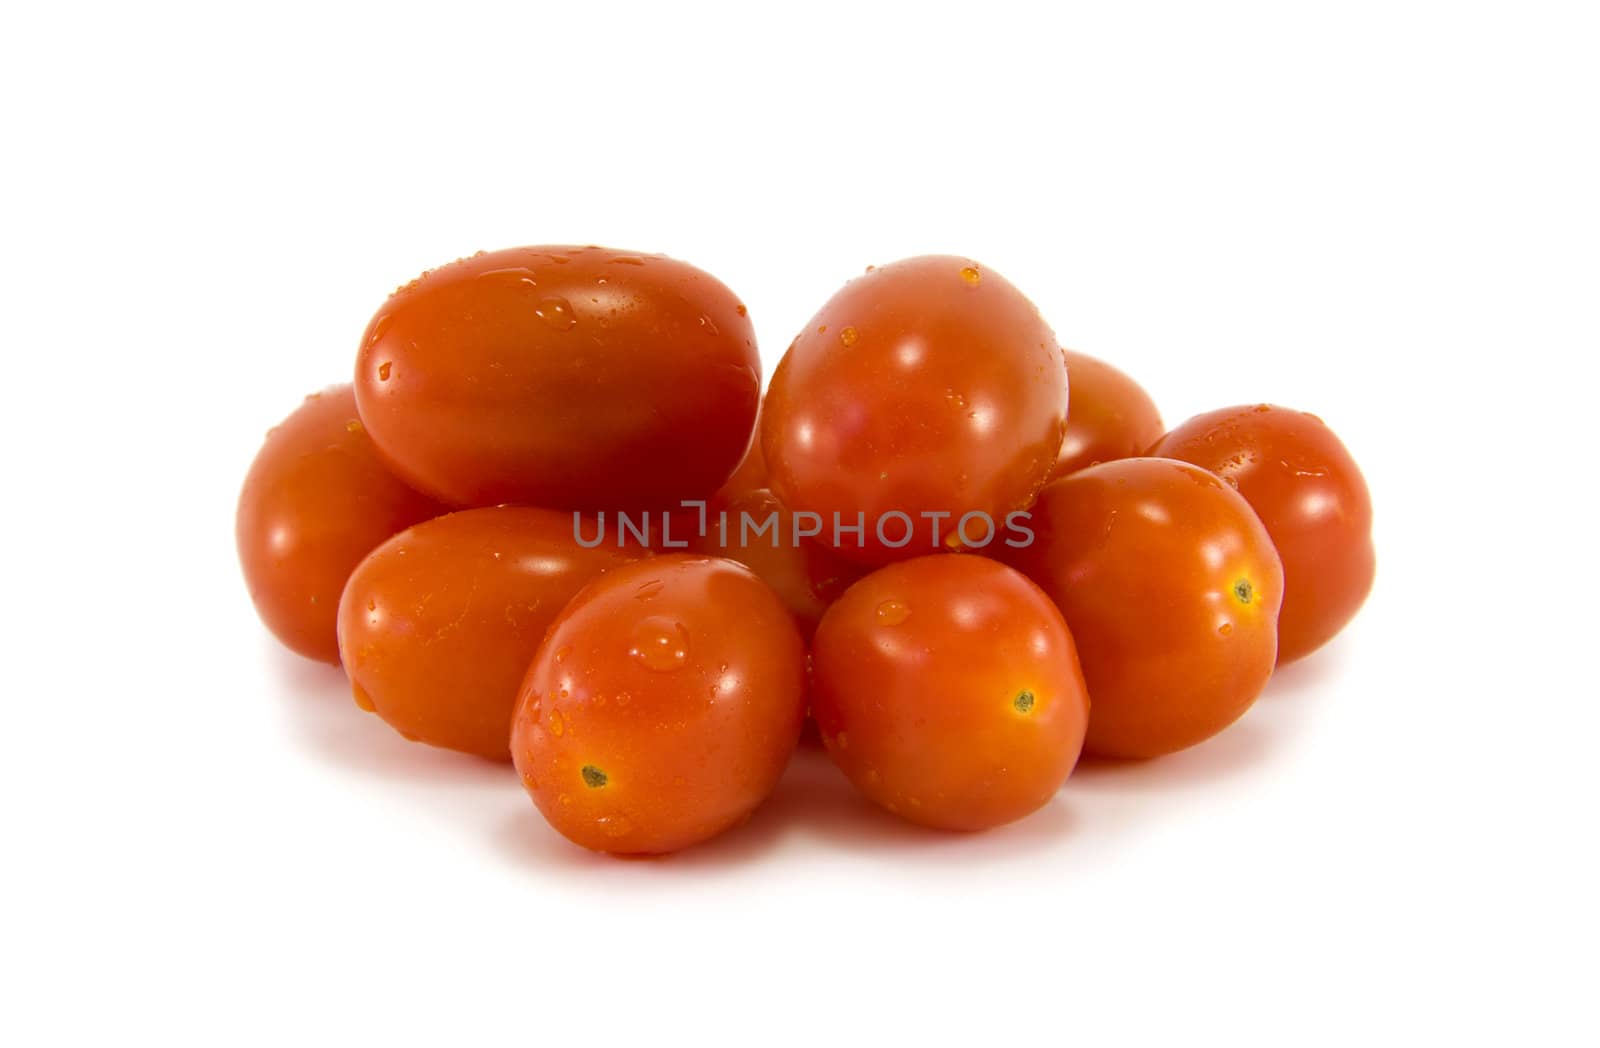 Rosa Tomatoes by ChrisAlleaume